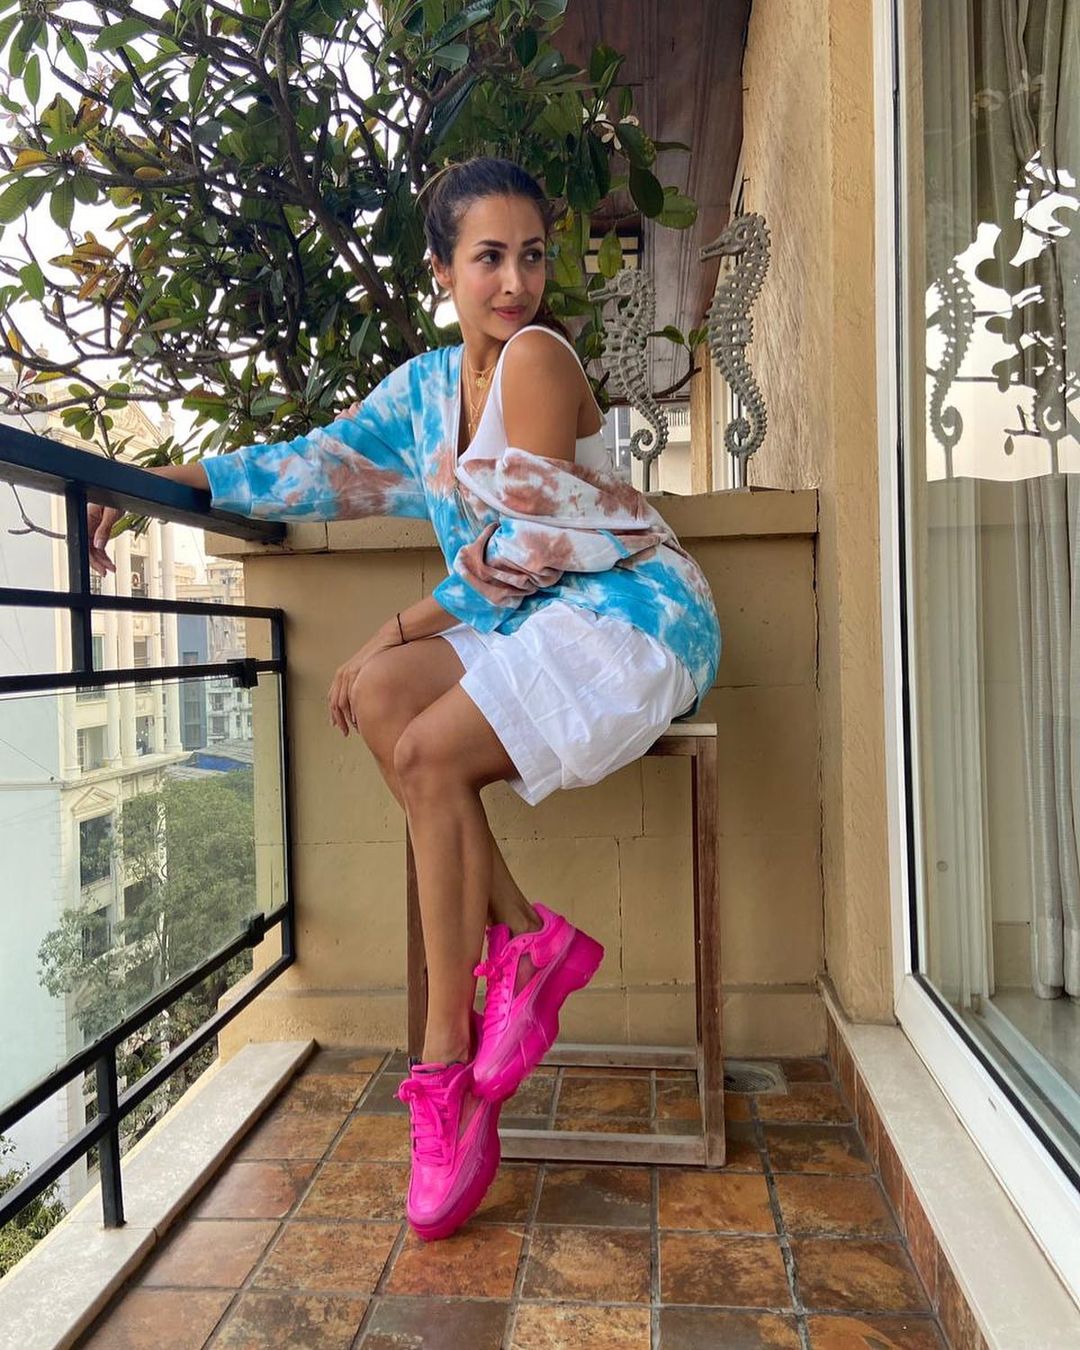  Malaika Arora keeps it simple yet fashionable in the tie-dye jacket with the white shorts and bright pink shoes. (Image: Instagram)